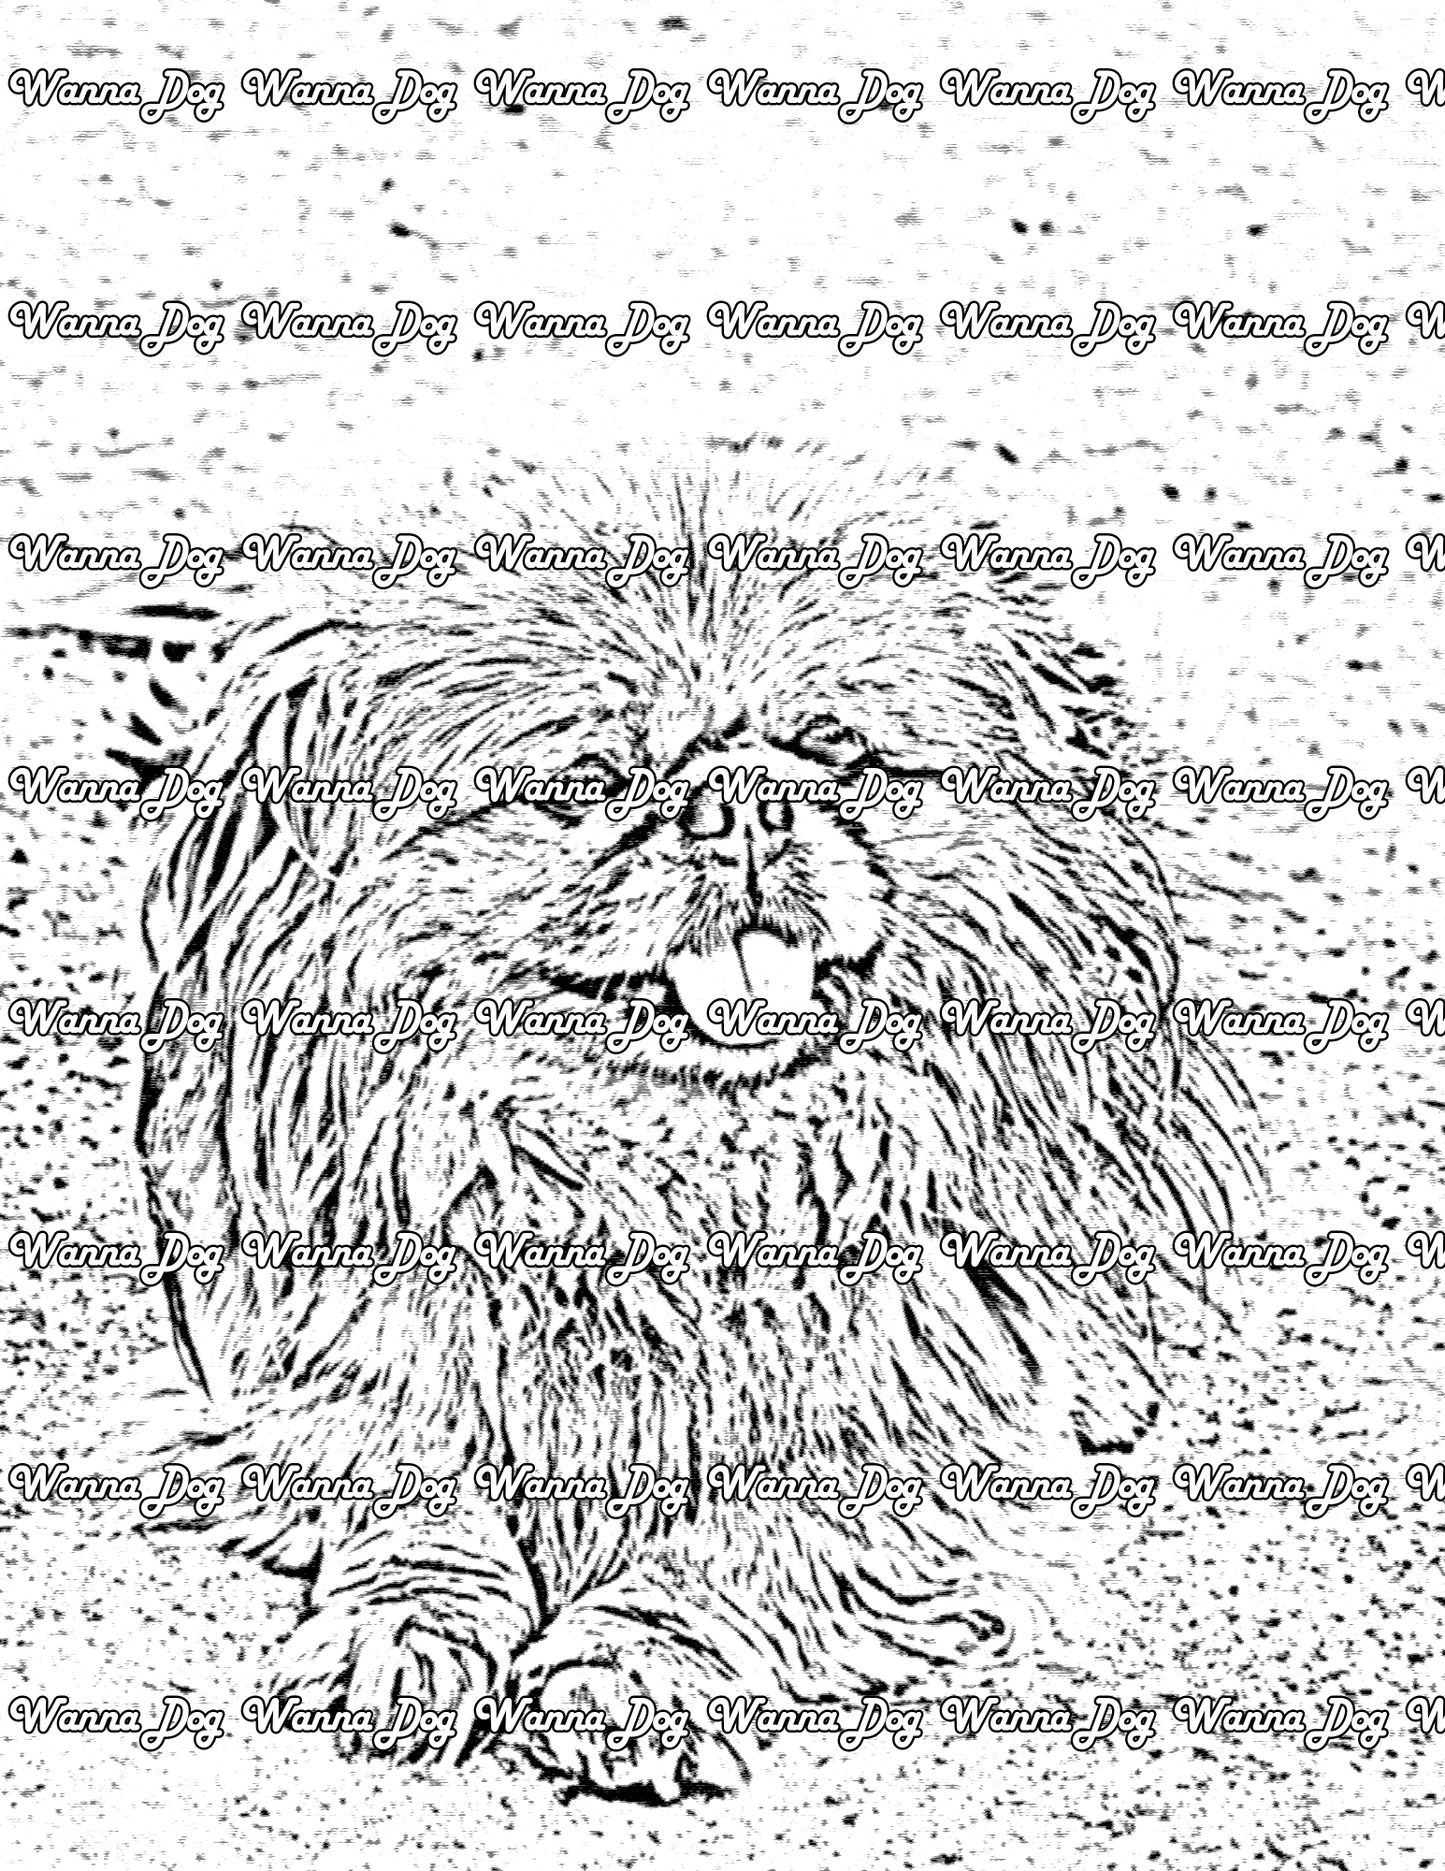 Pekingese Coloring Page of a Pekingese laying down with their tongue out